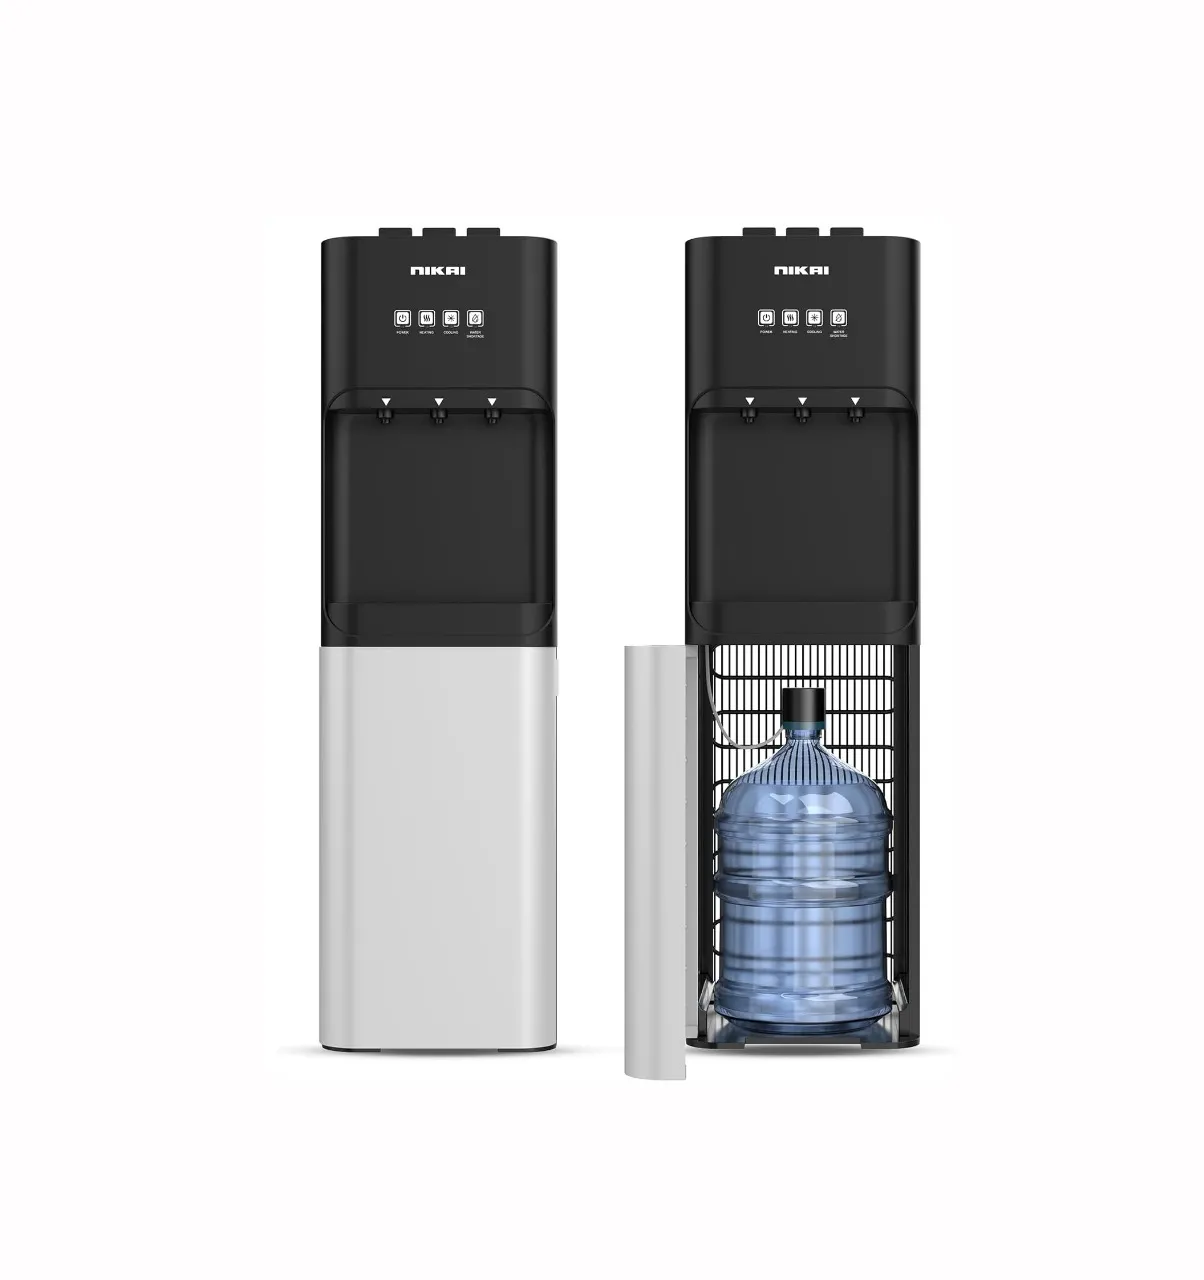 Nikai 3 Tap Bottom Loading Water Dispenser Instant Hot/Cold Child Safety Lock, Reservoir, Ideal For Home and Office Color Silver/Black Model – NWD4000BS – 1 Year Full 5 Year Compressor Warranty.